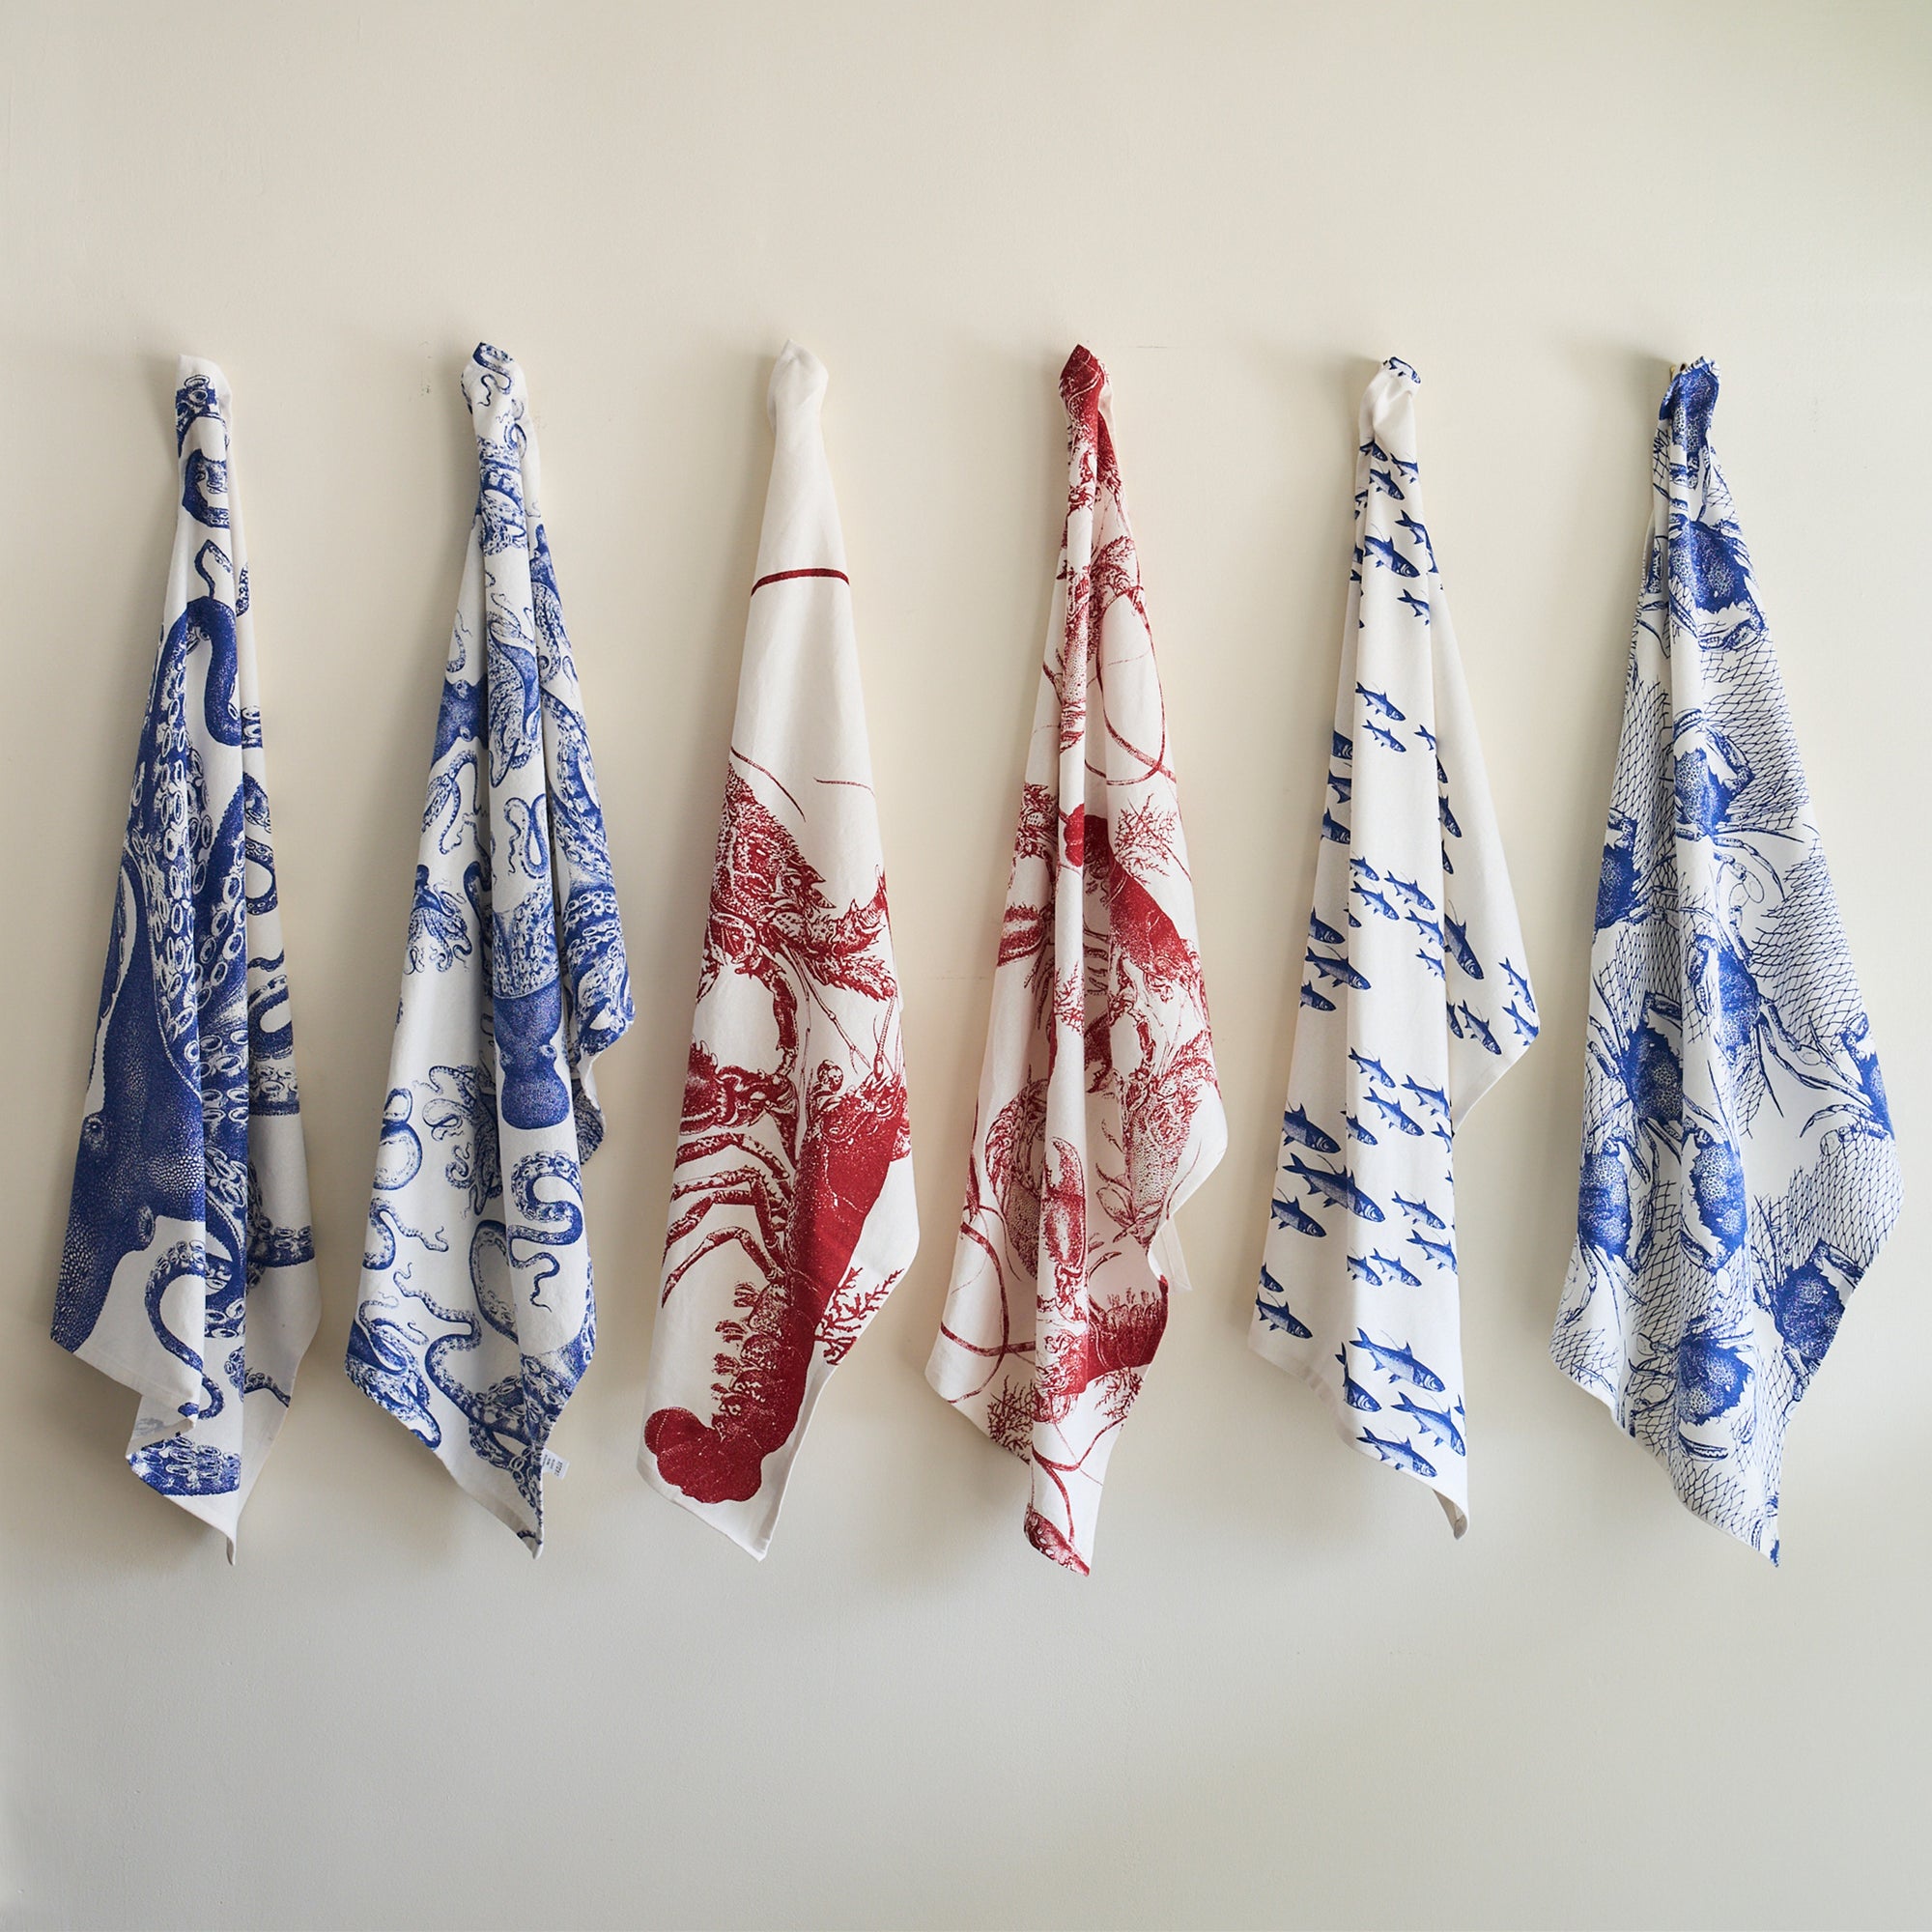 Cotton Kitchen Towels and Napkin Sets in Blue and Red Coastal patterns from Caskata